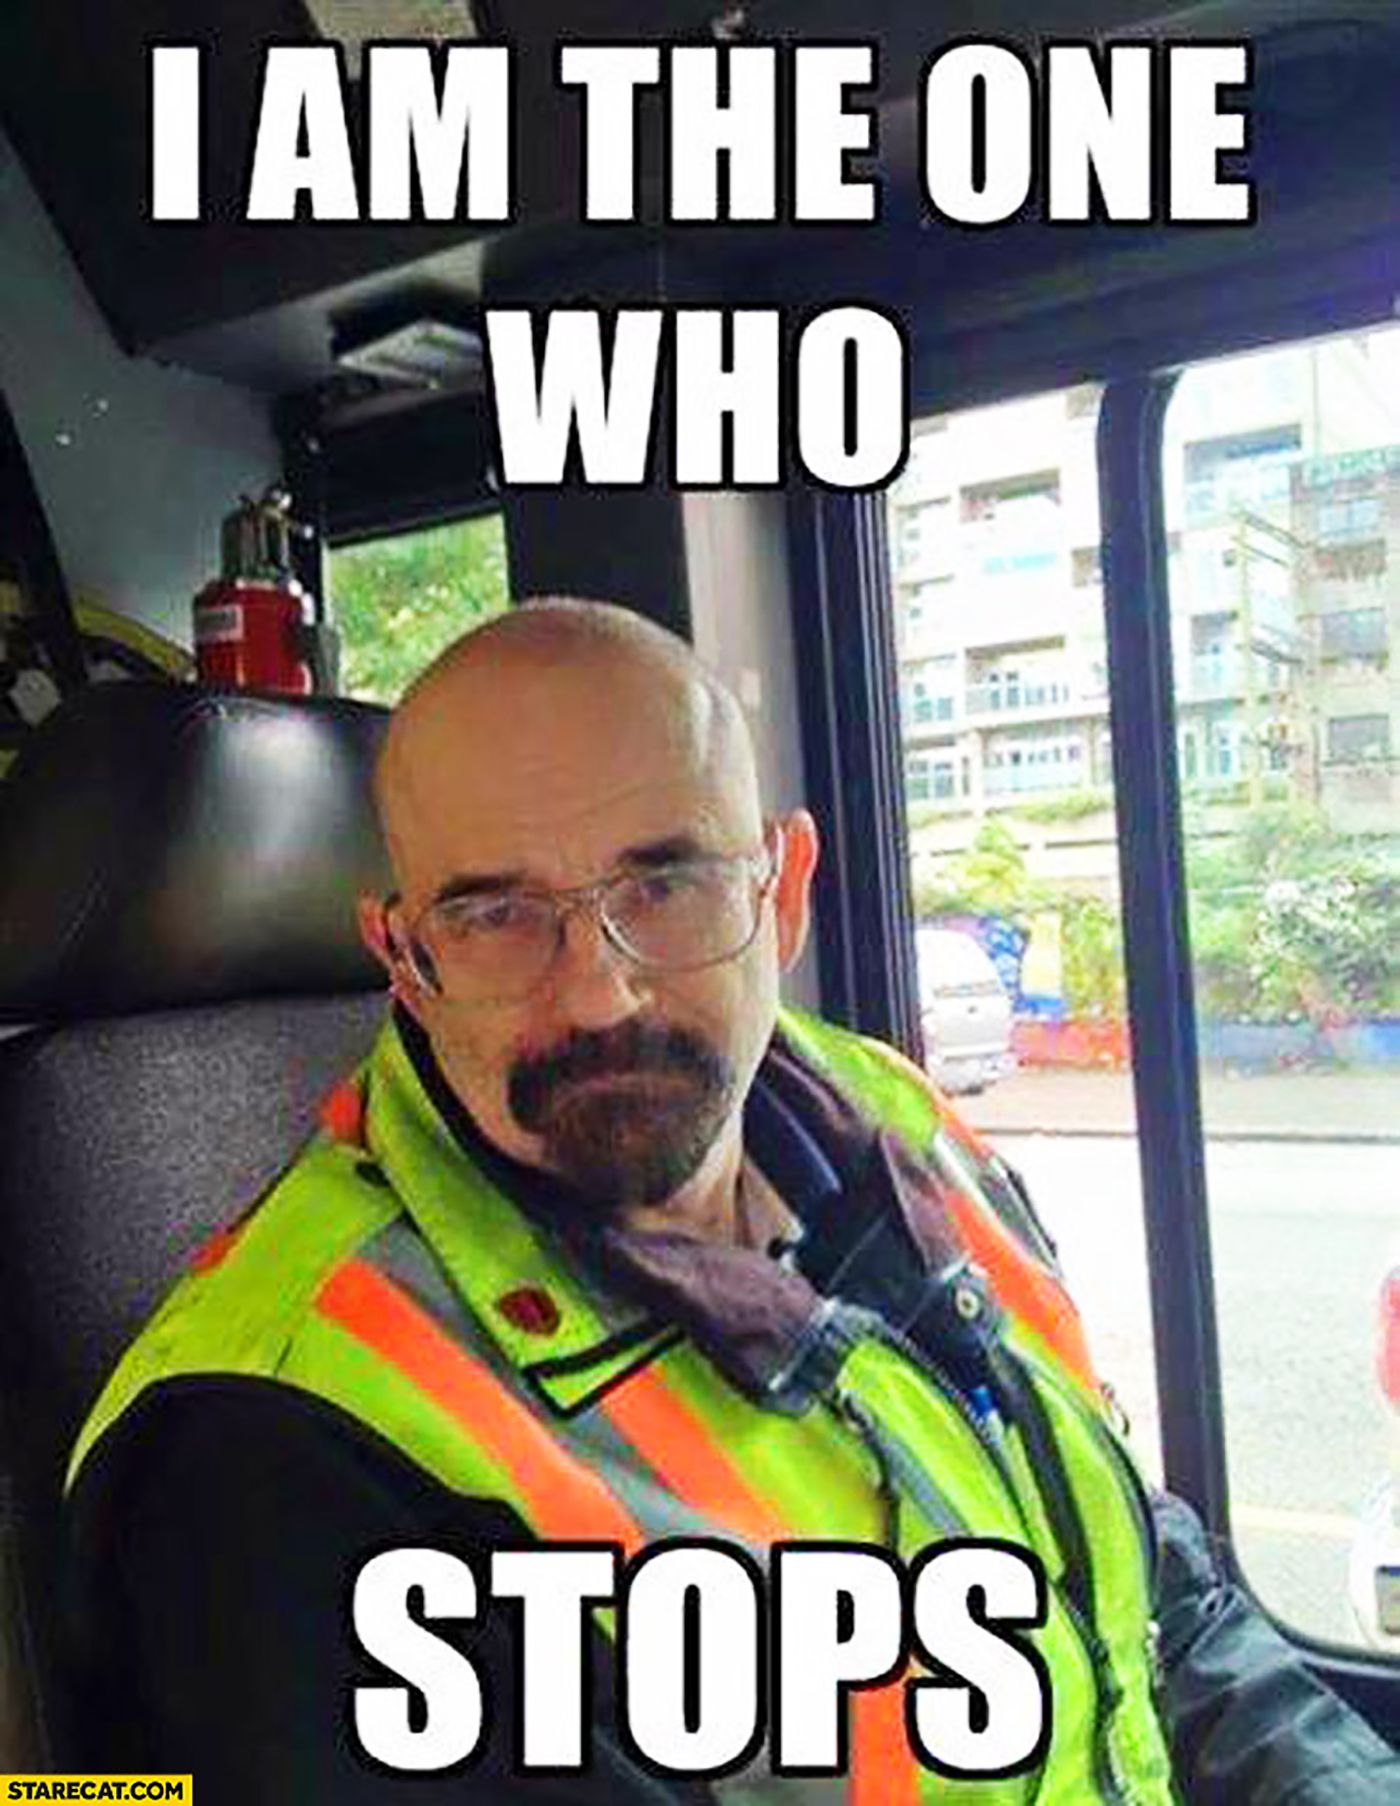 A Walter White look-a-like sitting behind a bus in a funny meme.